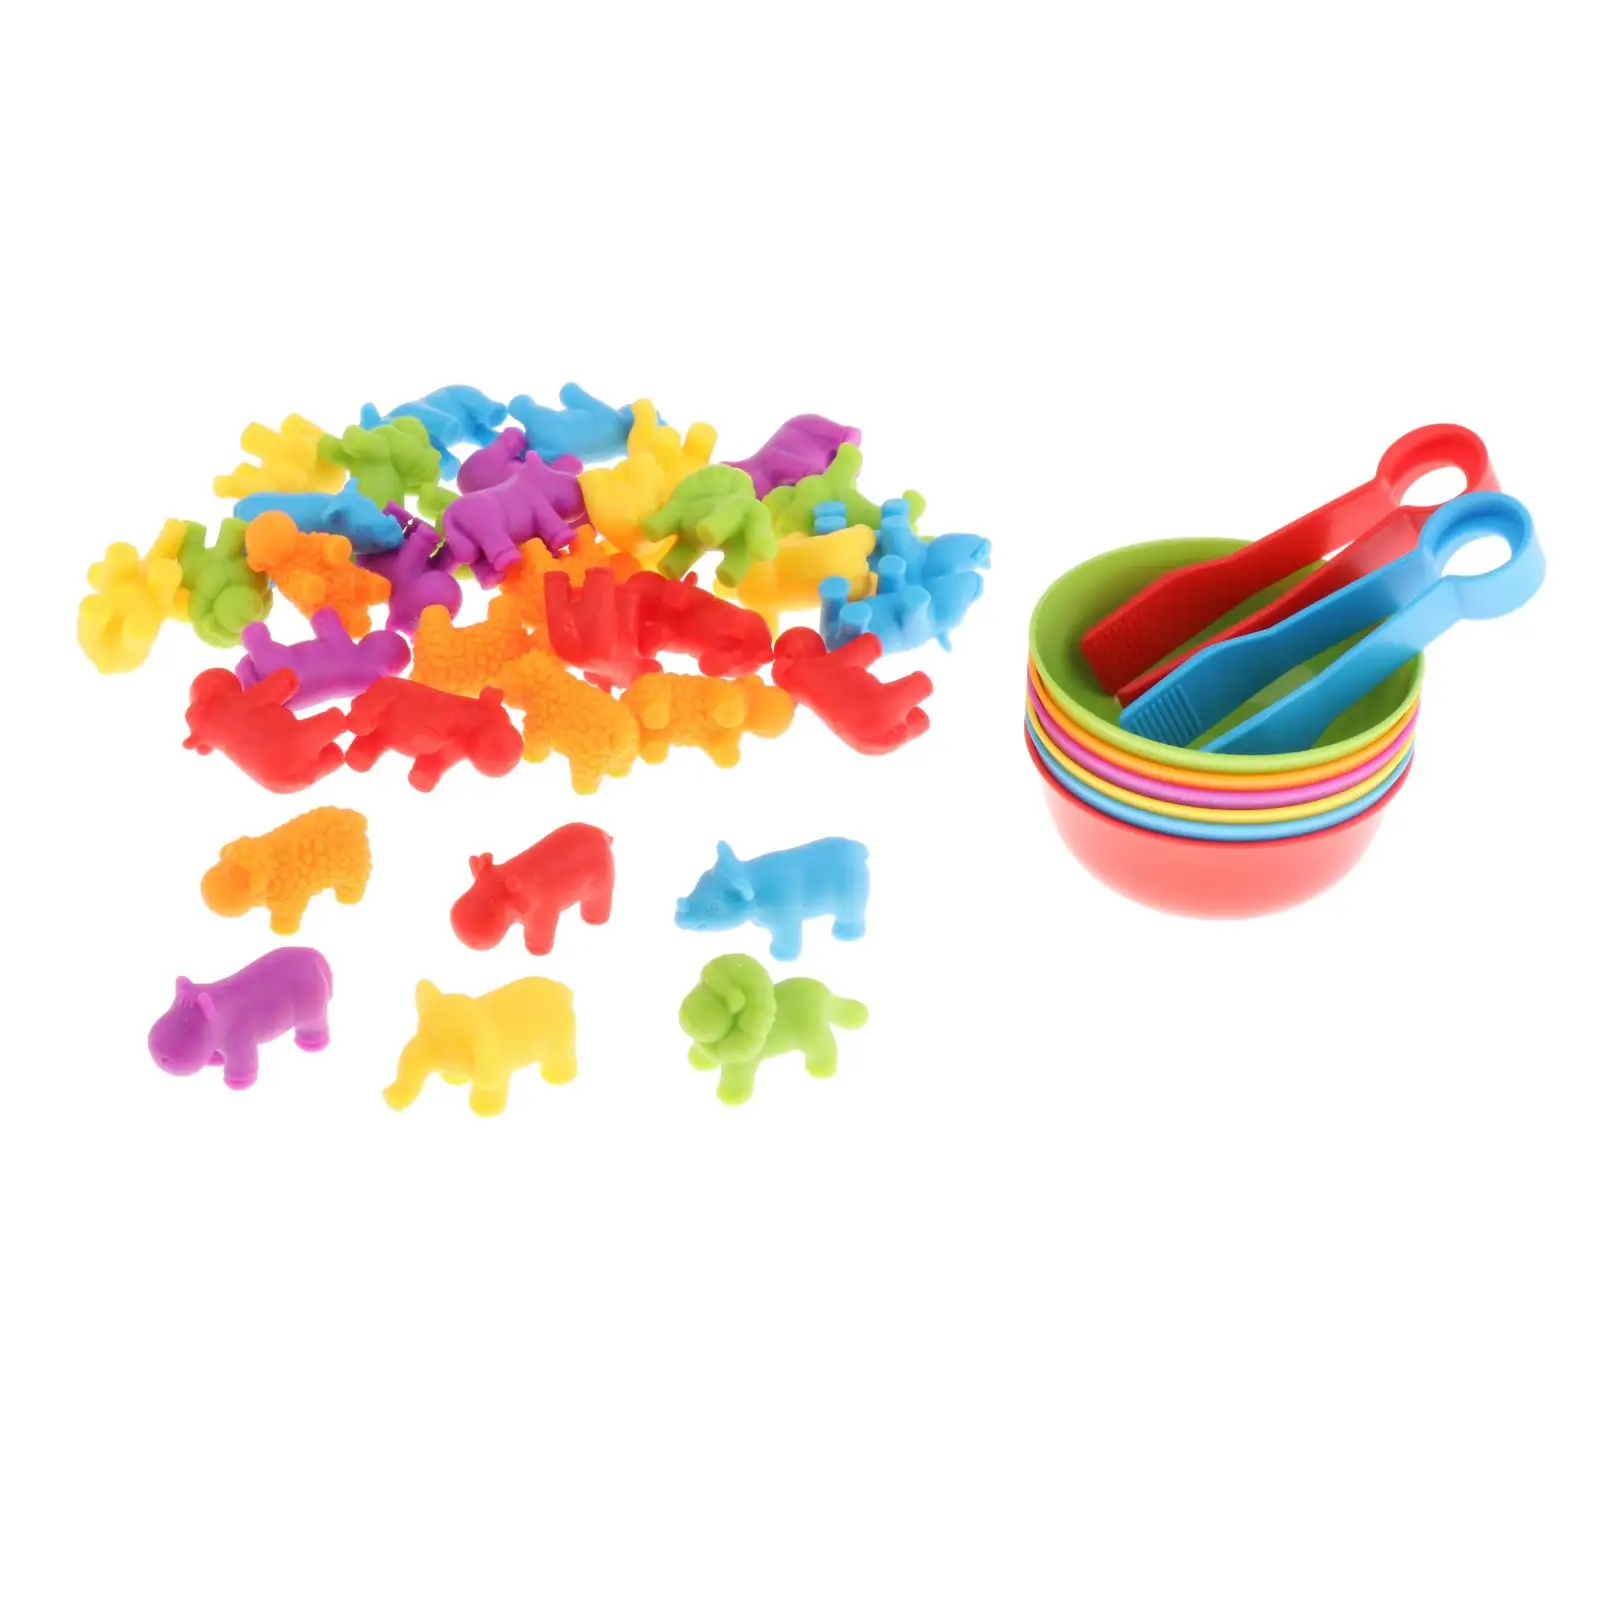 Colorful Sorting Toys with Bowls Early Learning Counting Educational Toys for Toddler Kids Child